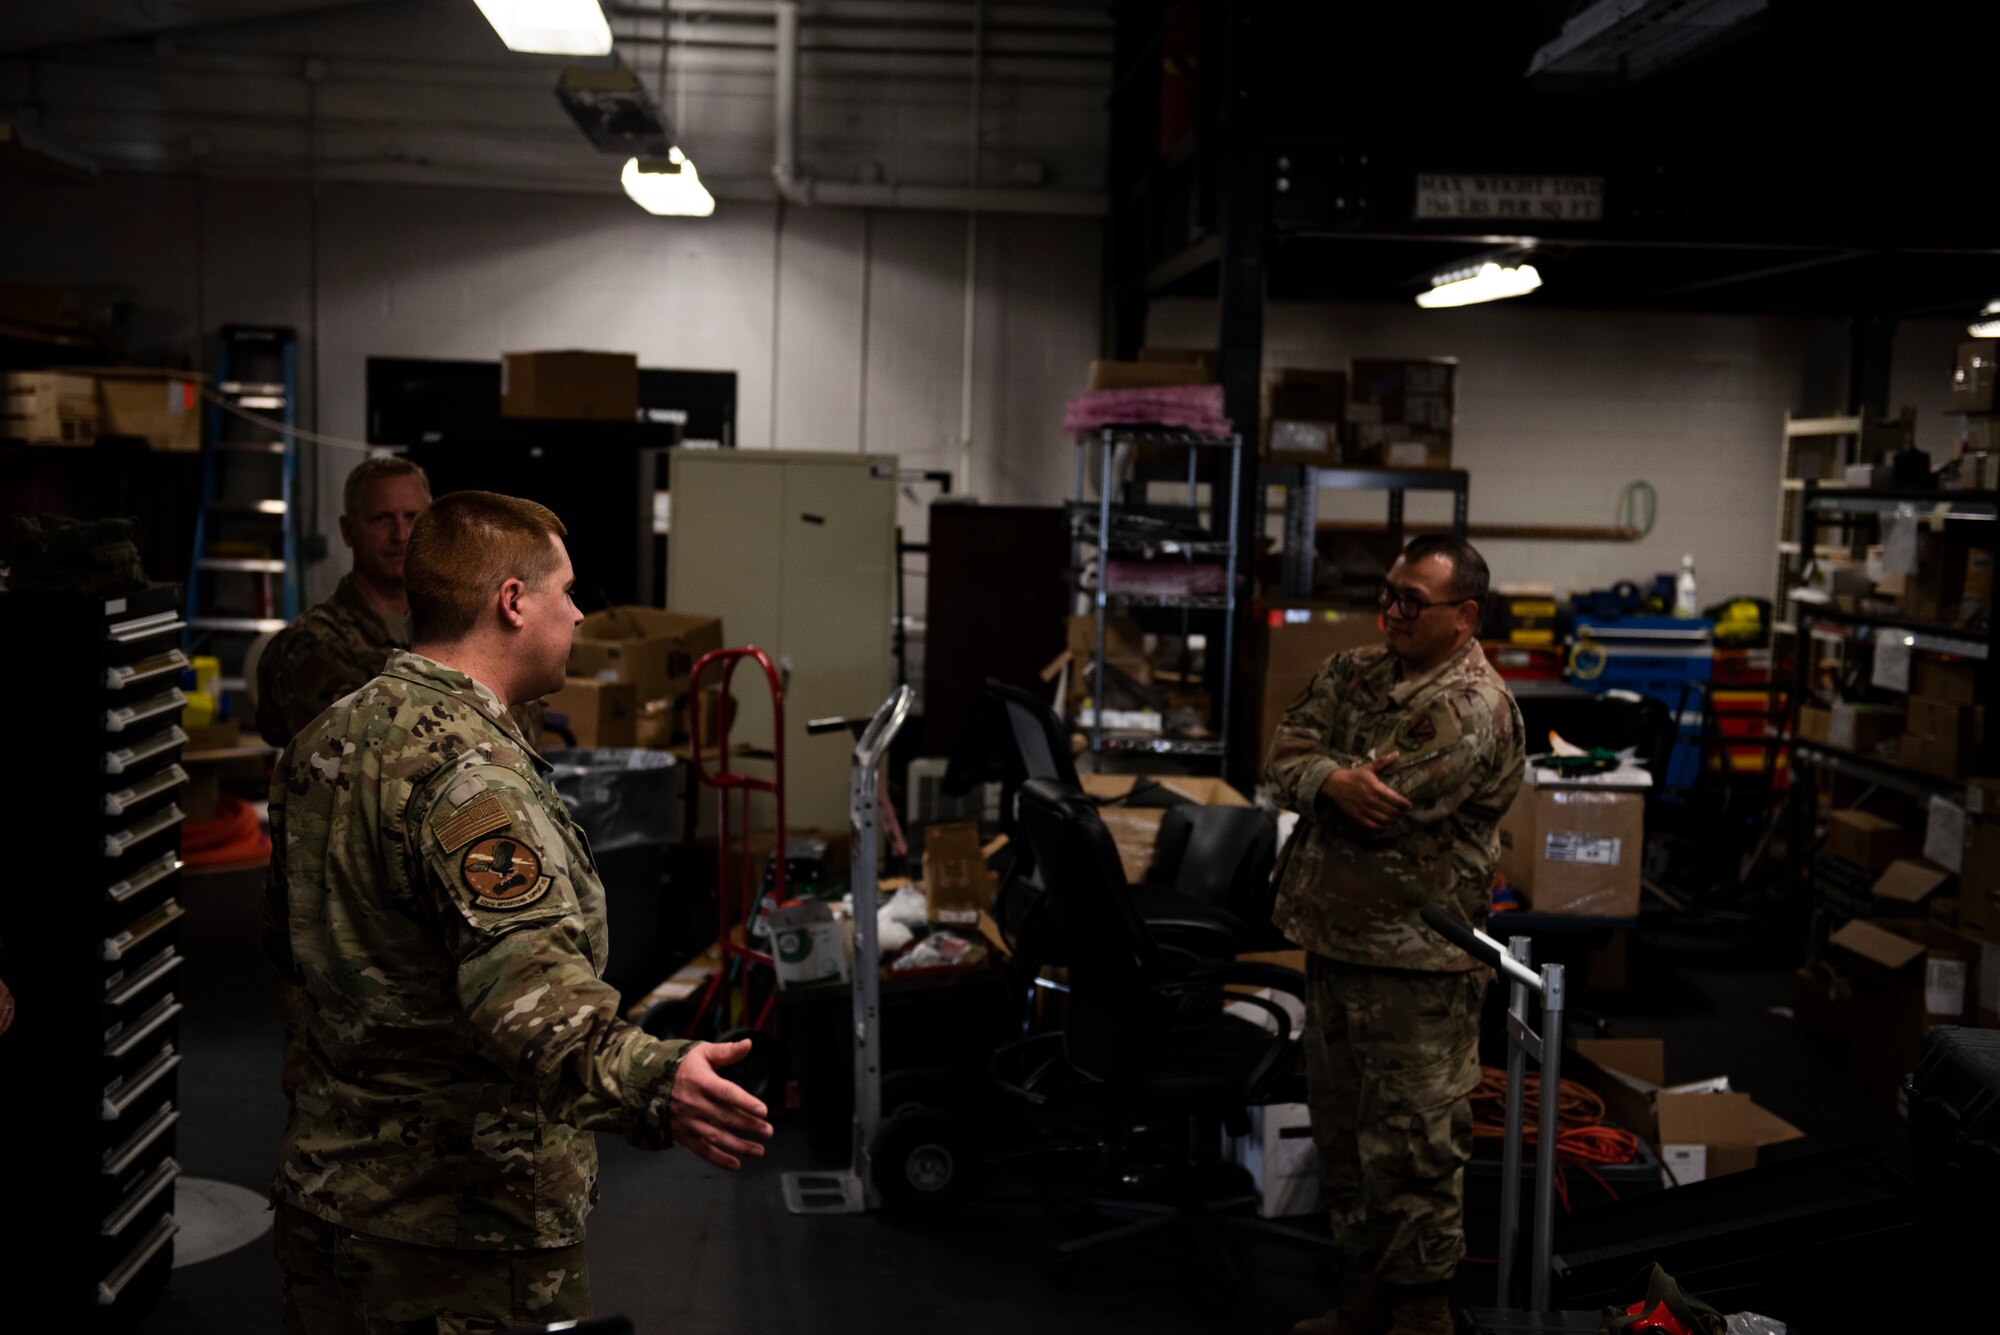 U.S. Air Force Staff Sgt. Christopher Kiebach, 325th Operations Support Squadron Radar, Airfield, and Weather supervisor, left, briefs U.S. Air Force Col, Brian Laidlaw, 325th Fighter Wing commander, center, and U.S. Air Force Tech. Sgt. Richard Oliver, 325th OSS RAWS noncommissioned officer in charge at Tyndall Air Force Base, Florida, Nov. 26, 2019. Kiebach have a tour of the unit's work center to Laidlaw, discussed manning, operations, and the status for new and old equipment used for the base's mission. (U.S. Air Force photo by Staff Sgt. Magen M. Reeves)